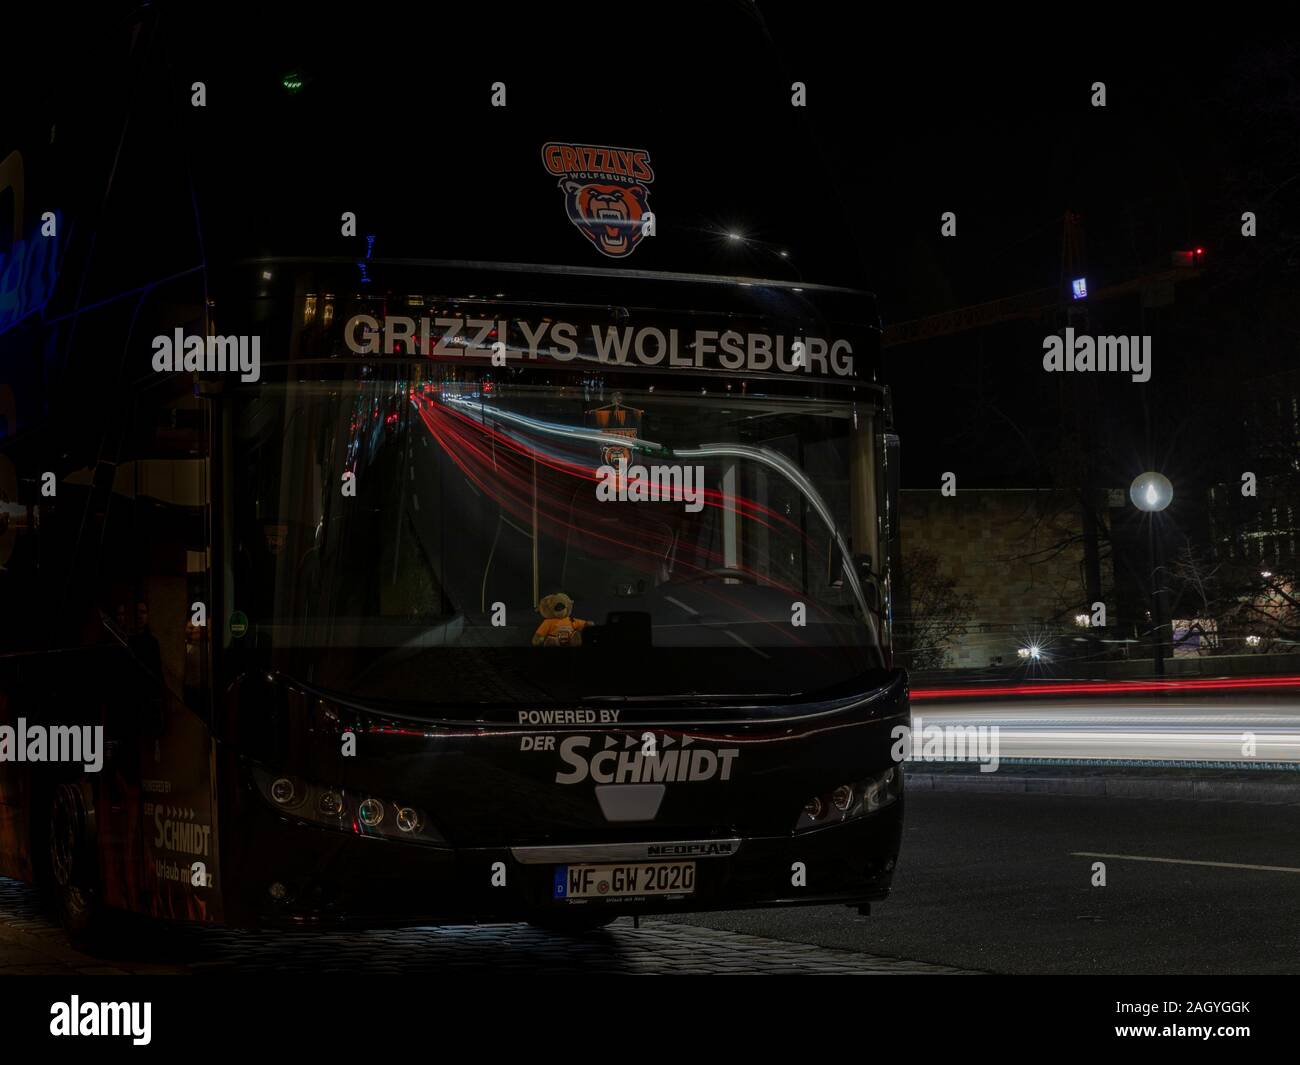 German professional sports teams travel to games sometimes with busses. Bus of Grizzlys Wolfsburg ice hockey team is parked in Nuremberg city. Stock Photo